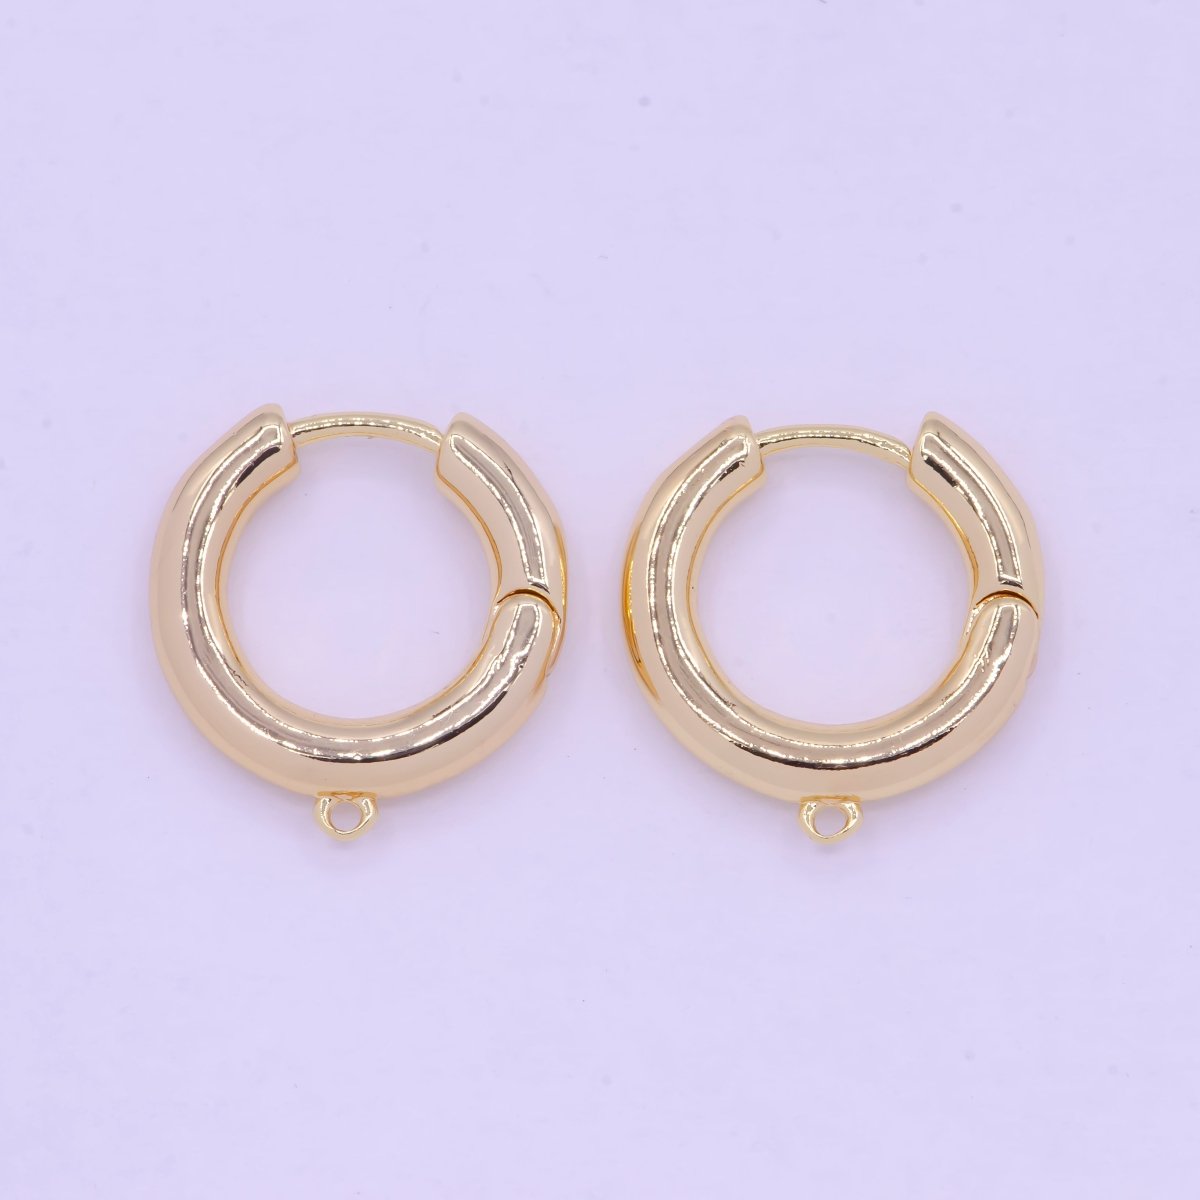 Gold Filled Earring Hoops Lever Back one touch w/ Close link Lever Hoop earring Nickel free Lead Free for Earring Charm Making Findings L-846 - DLUXCA